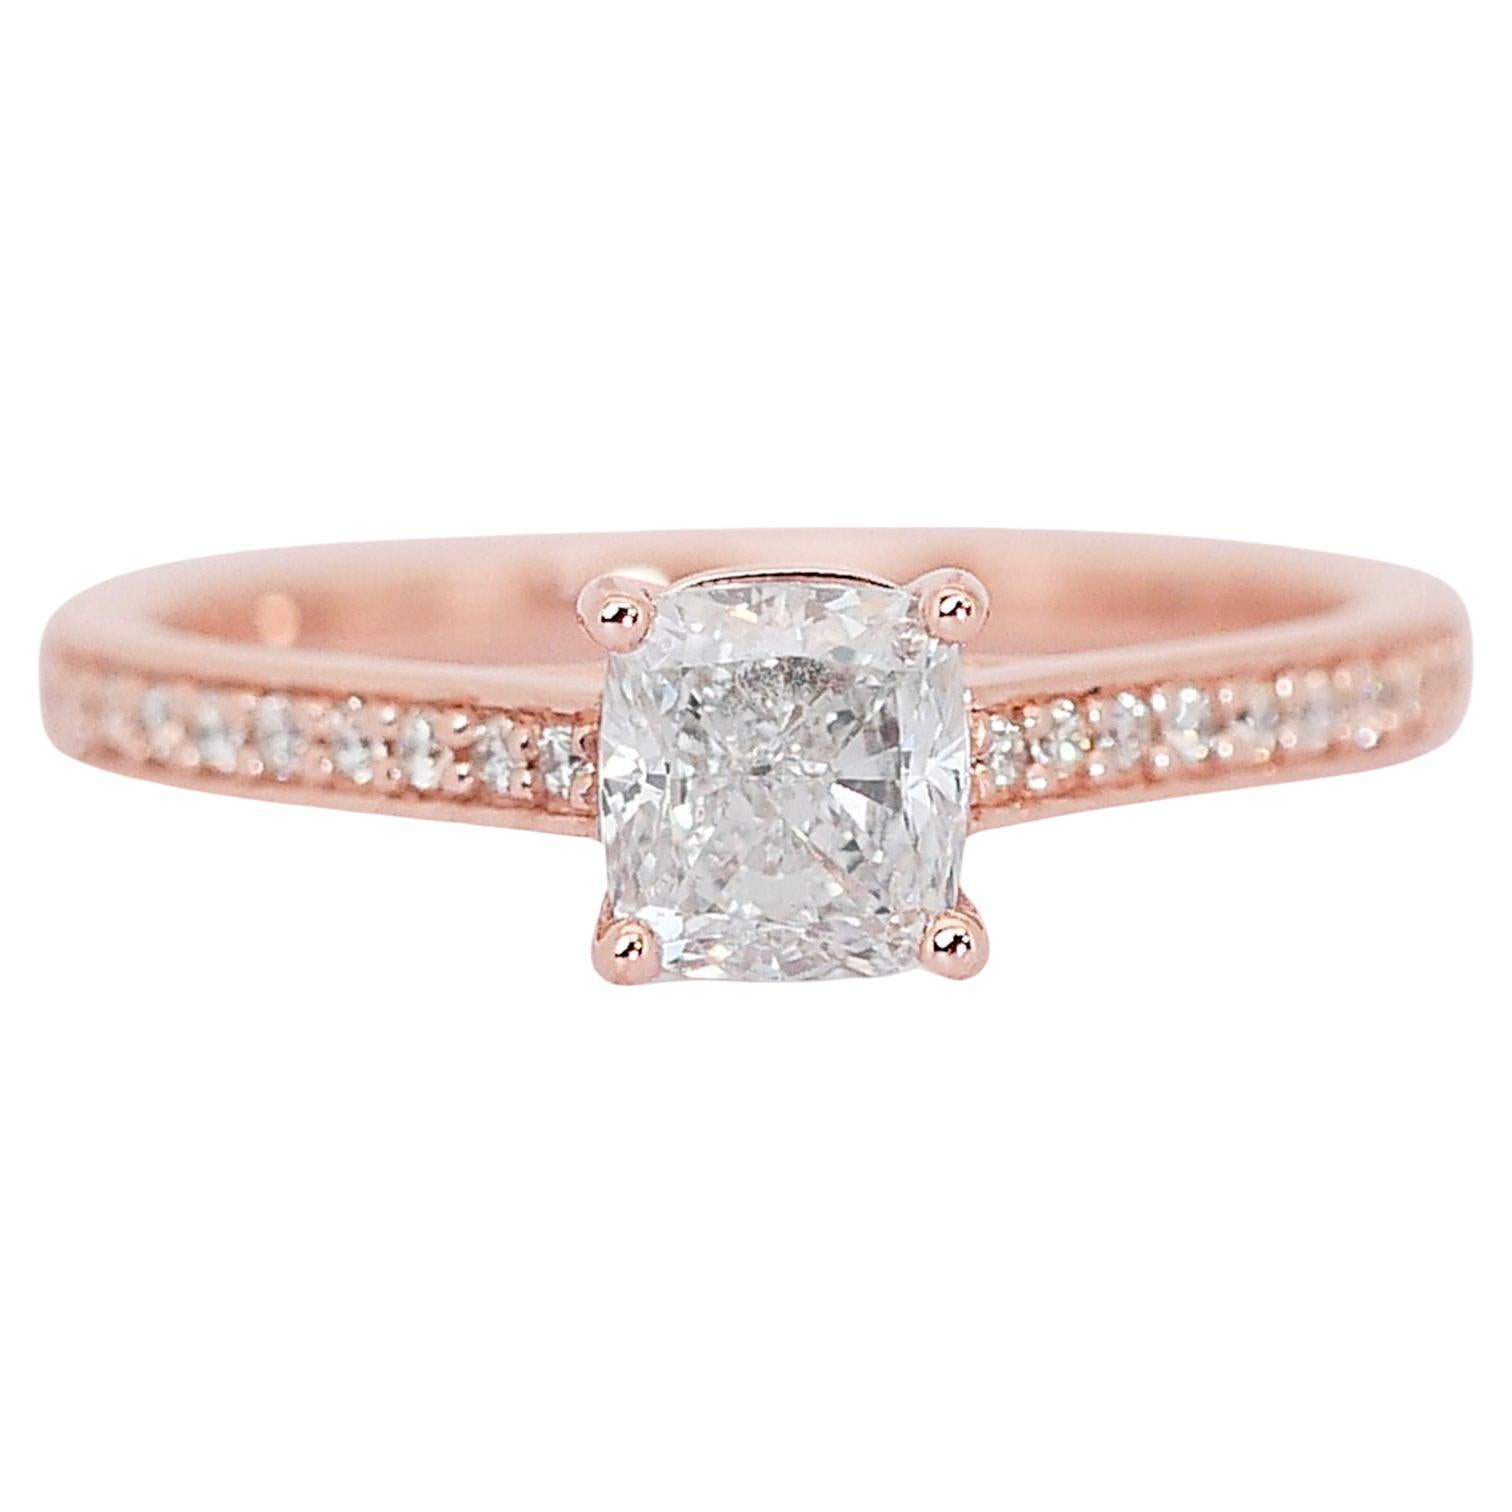 Radiant 1.17ct Diamond Pave Ring in 18k Rose Gold – GIA Certified